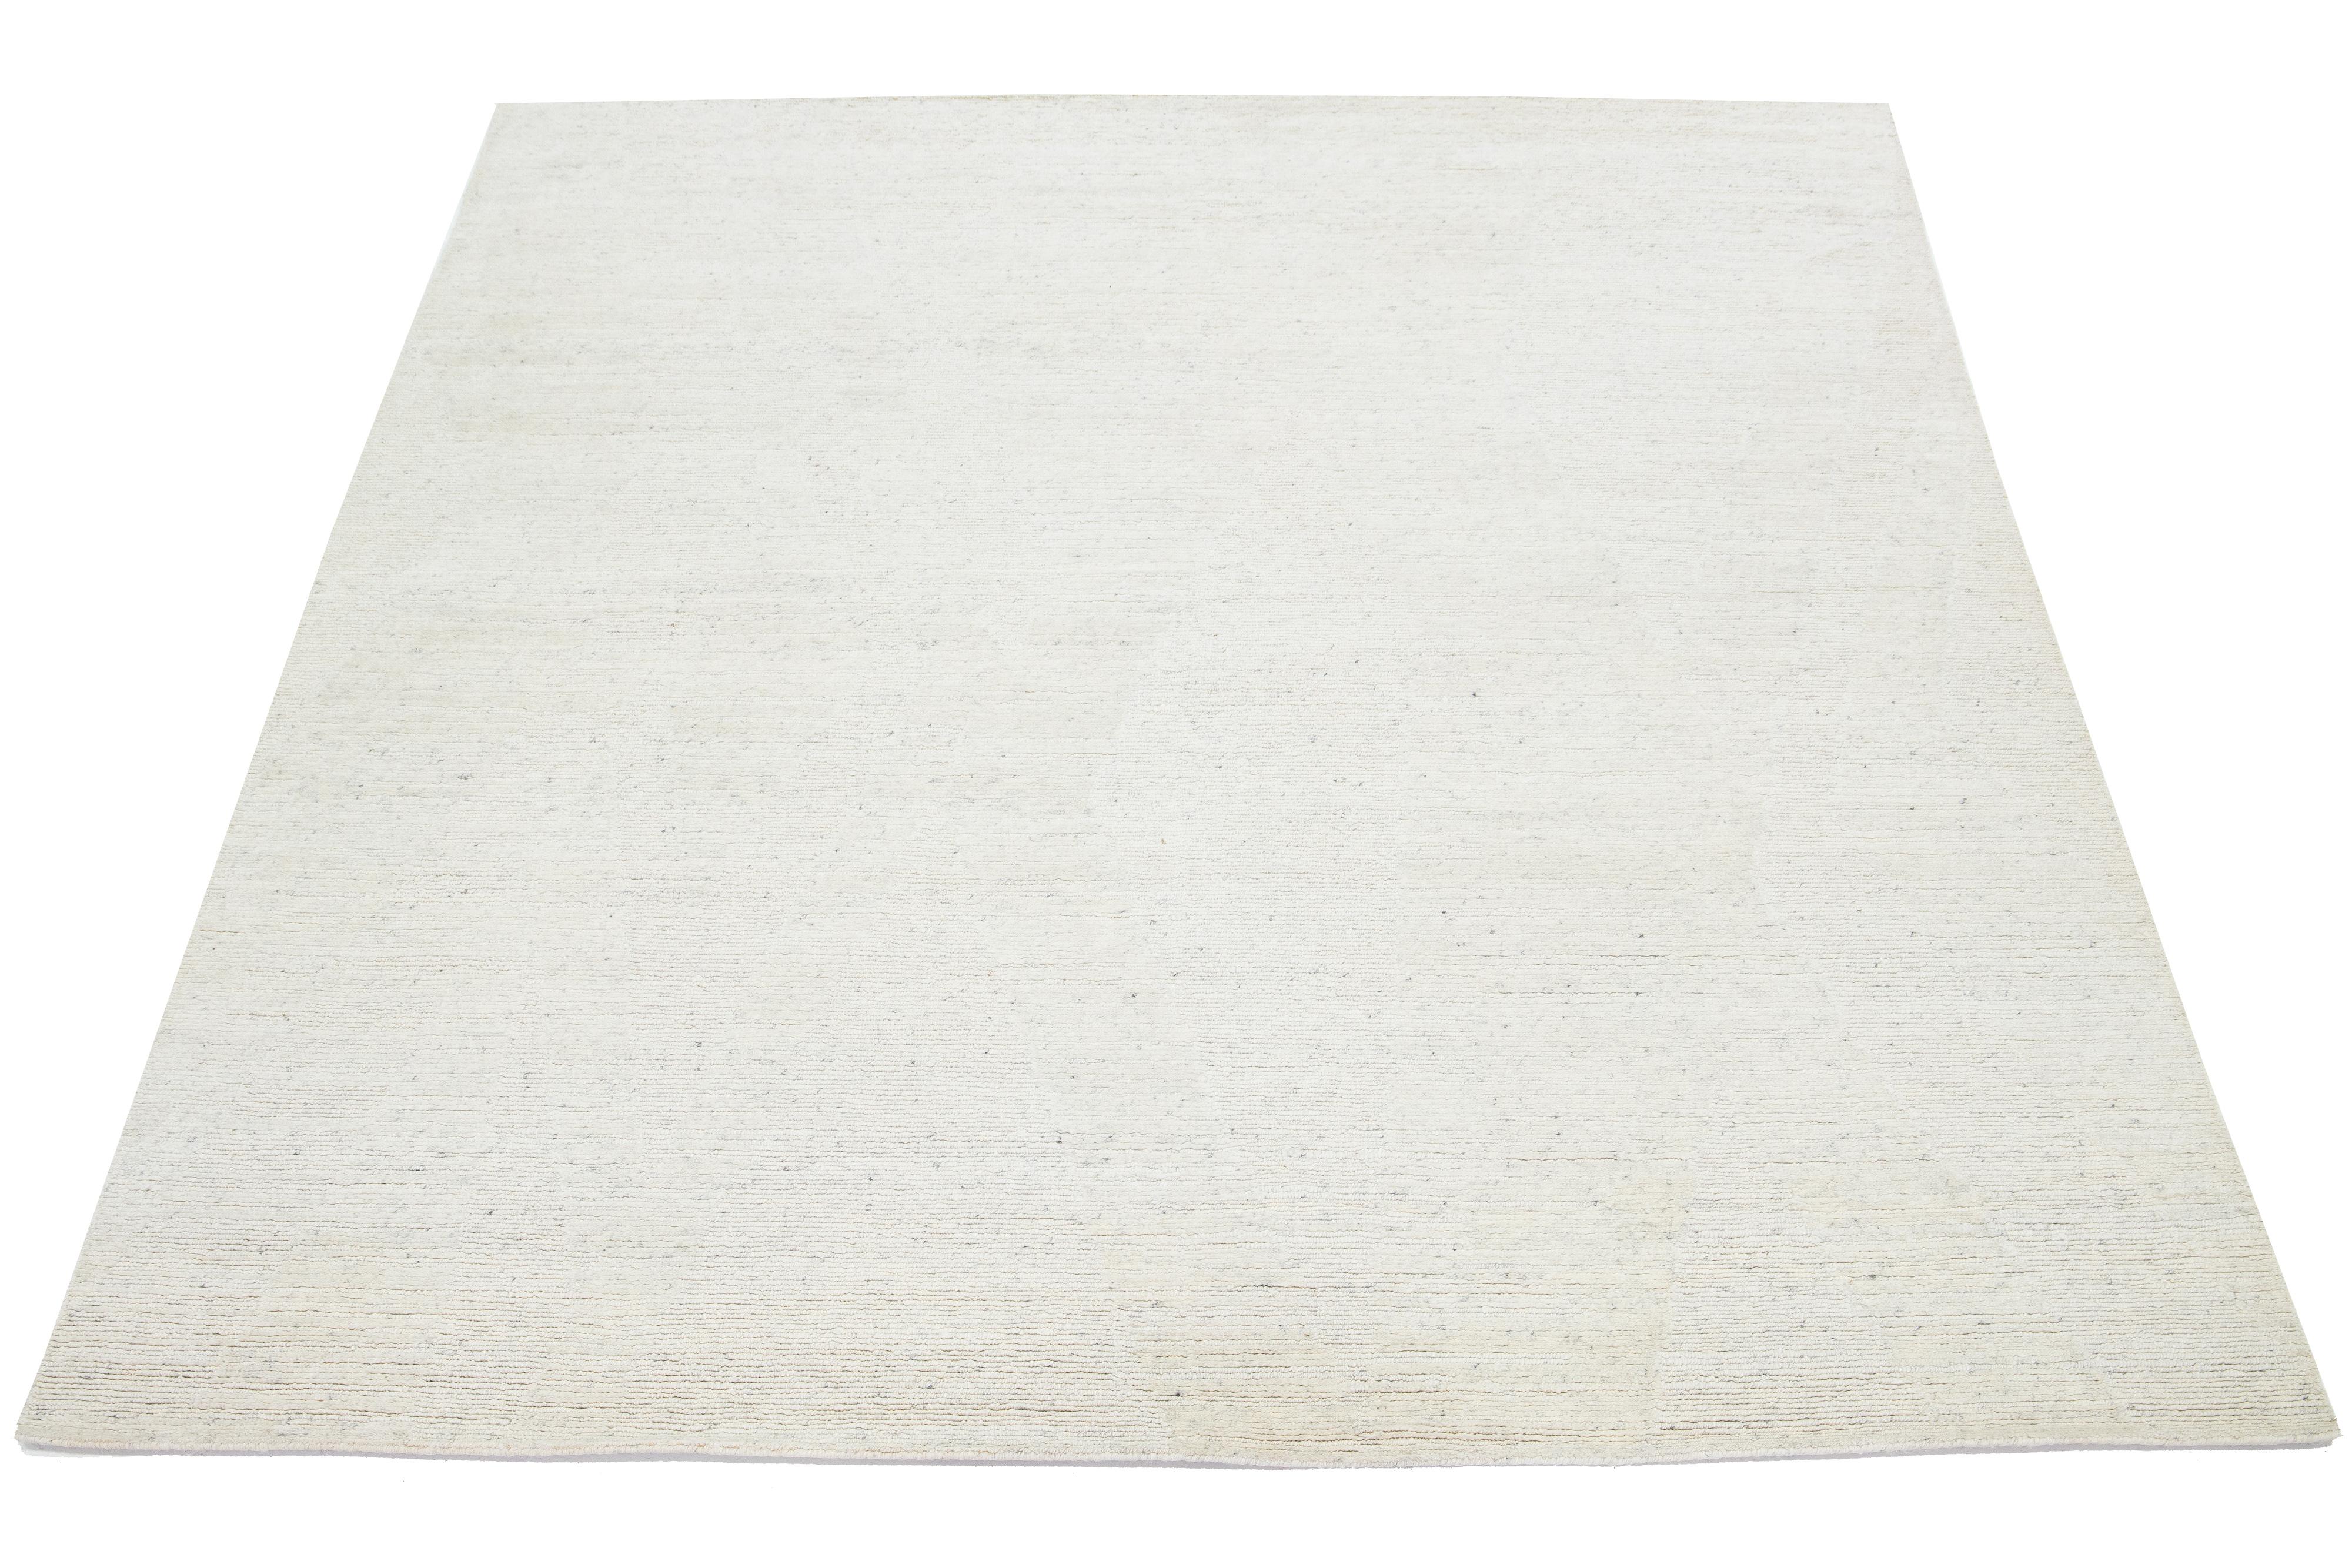 This hand-knotted Moroccan-style rug is made from wool and showcases a captivating minimalist aesthetic. It features a naturally hued ivory background.

This rug measures 8' x 10'.